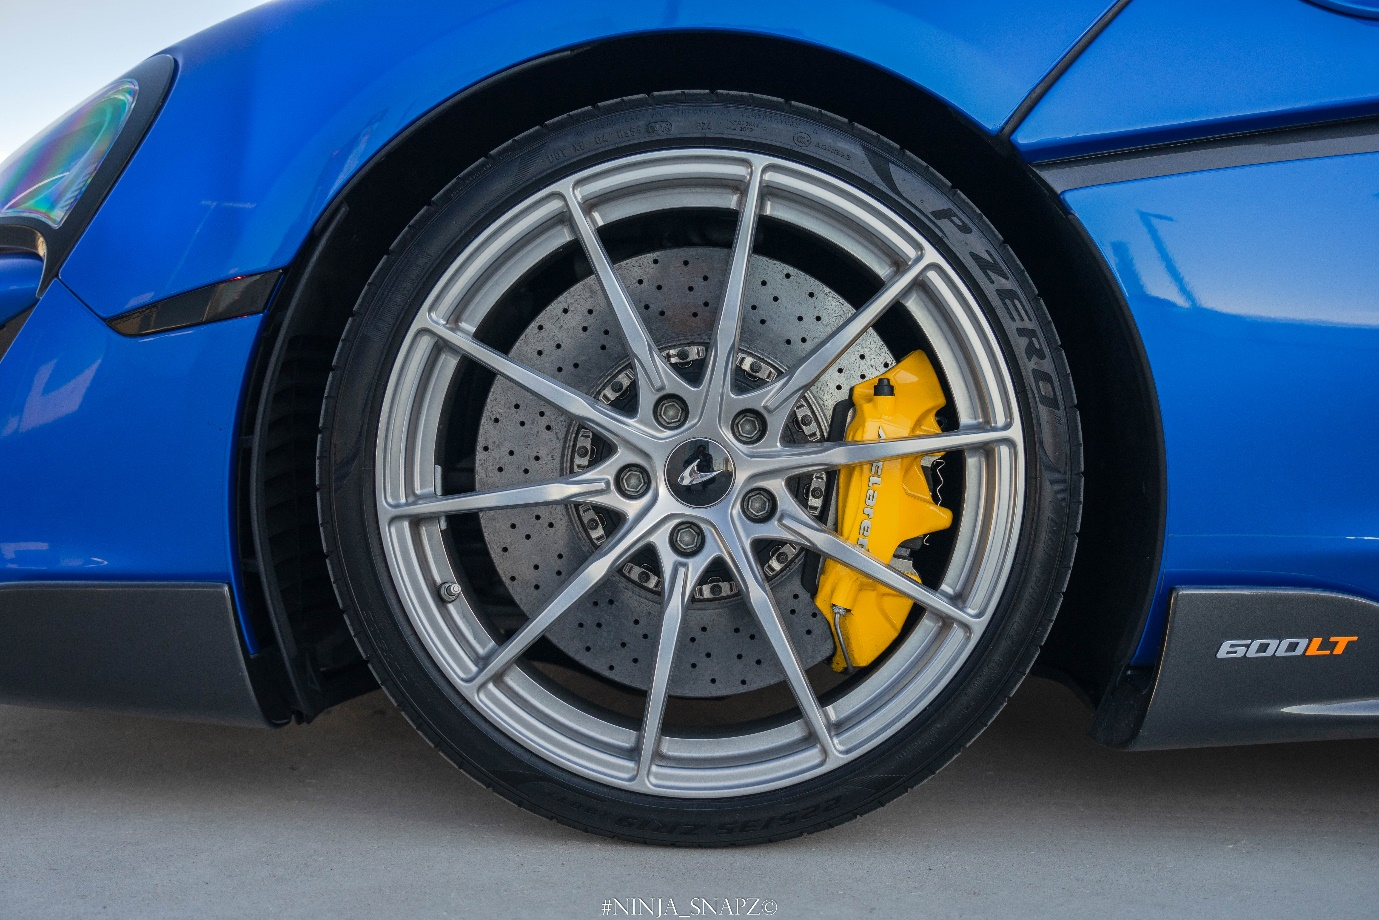 The McLaren 600LT Spider Blue is shown with a close-up of its wheel.